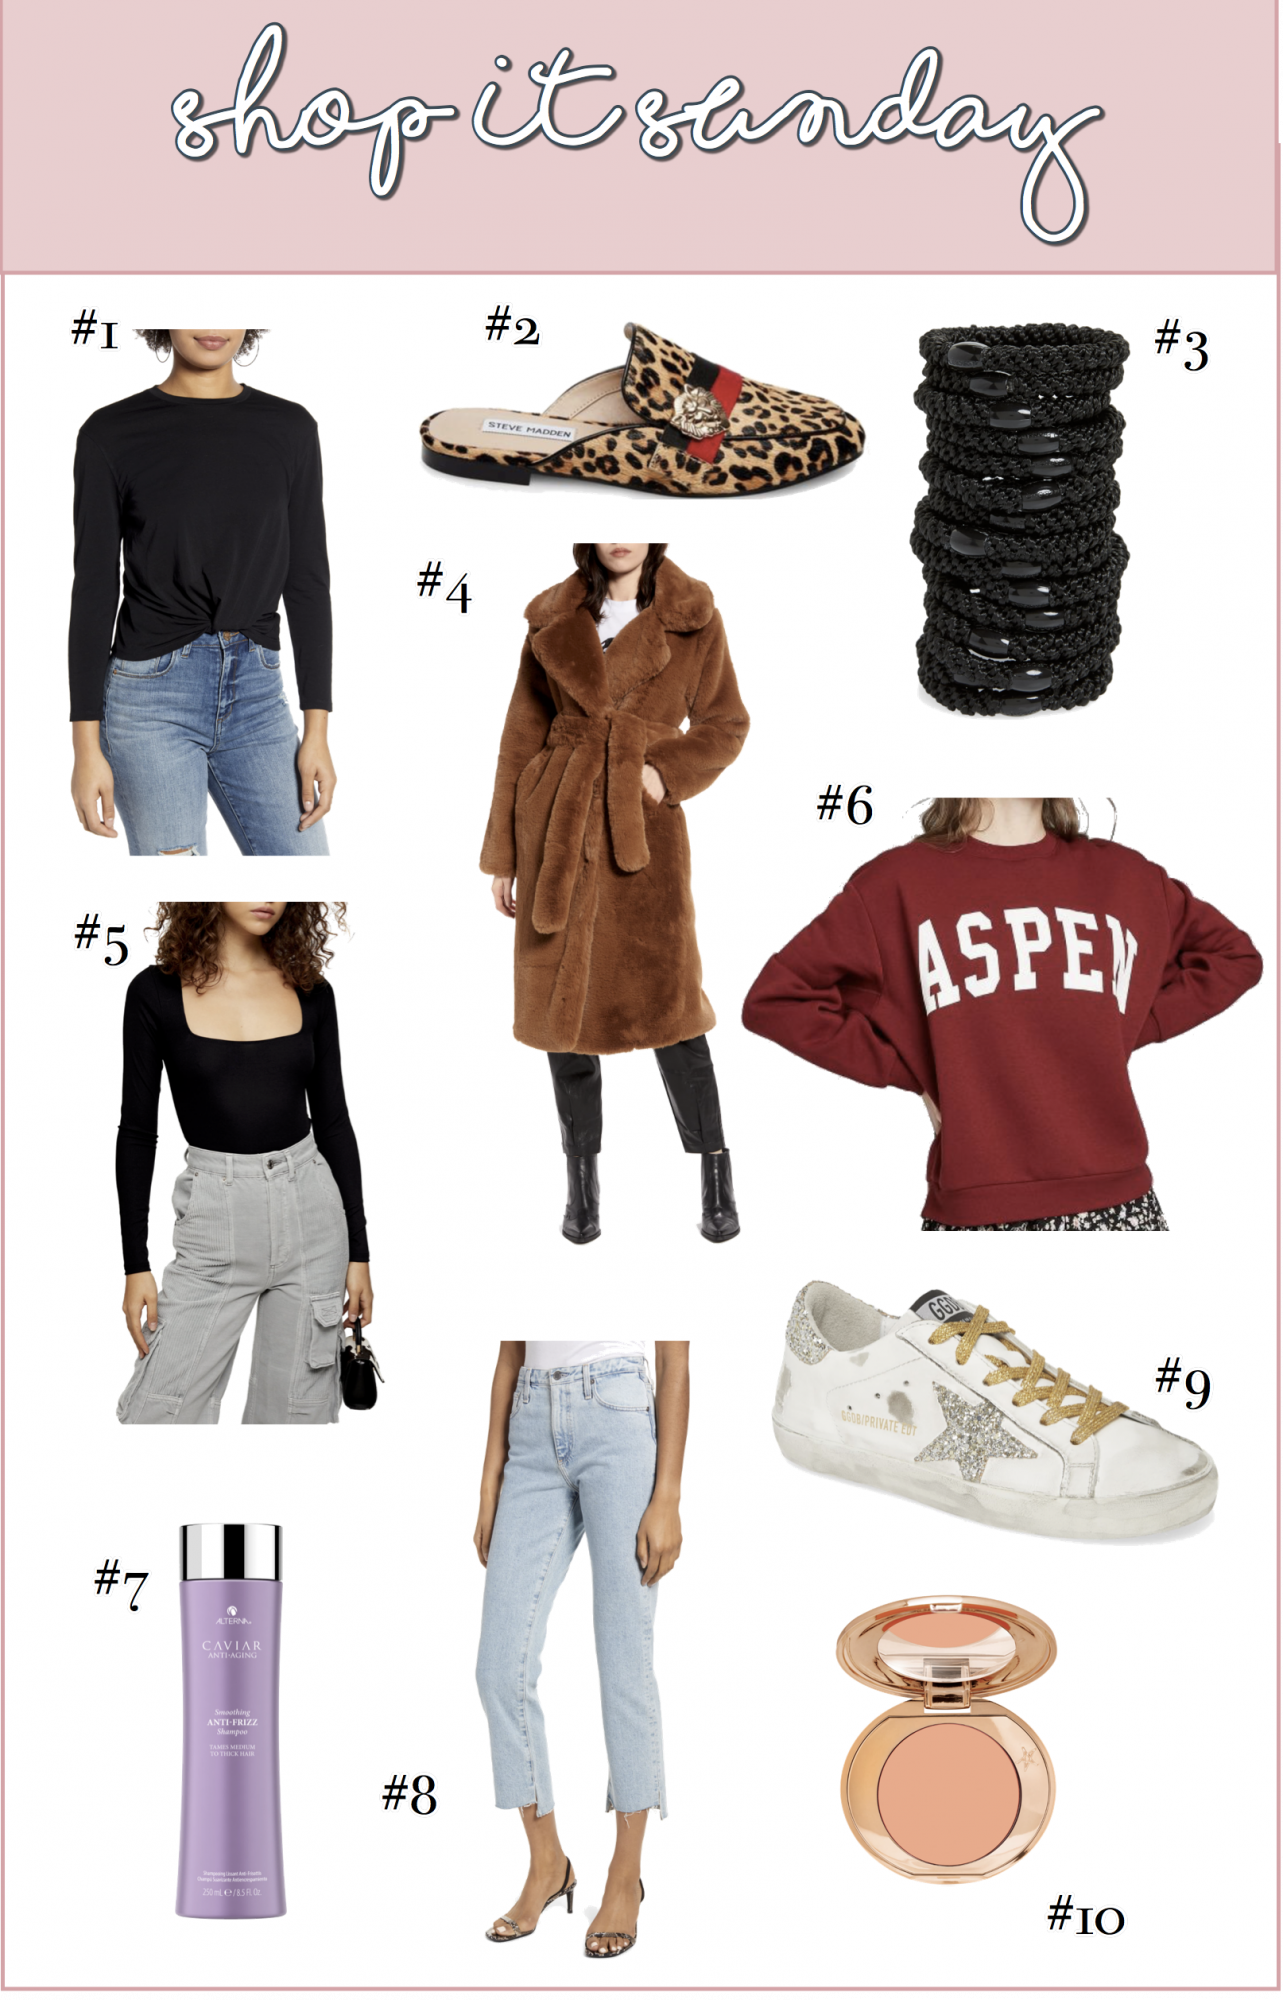 SHOP-IT SUNDAY // READERS FAVORITES FROM LAST WEEK by popular US life and style blog, The Sweetest Thing: collage image of golden good sneakers, Nordstrom Knot Front Tee BP., Steve Madden KARISMA LEOPARD, Nordstrom Longline Faux Fur Coat NA-KD, Nordstrom Long Sleeve Square Neck Bodysuit TOPSHOP, Target Wild Fable Women's Oversized Crewneck Aspen Graphic Sweatshirt, Nordstrom Caviar Anti-Aging Anti-Frizz Shampoo ALTERNA, and Nordstrom Magic Vanish! Color Corrector CHARLOTTE TILBURY.